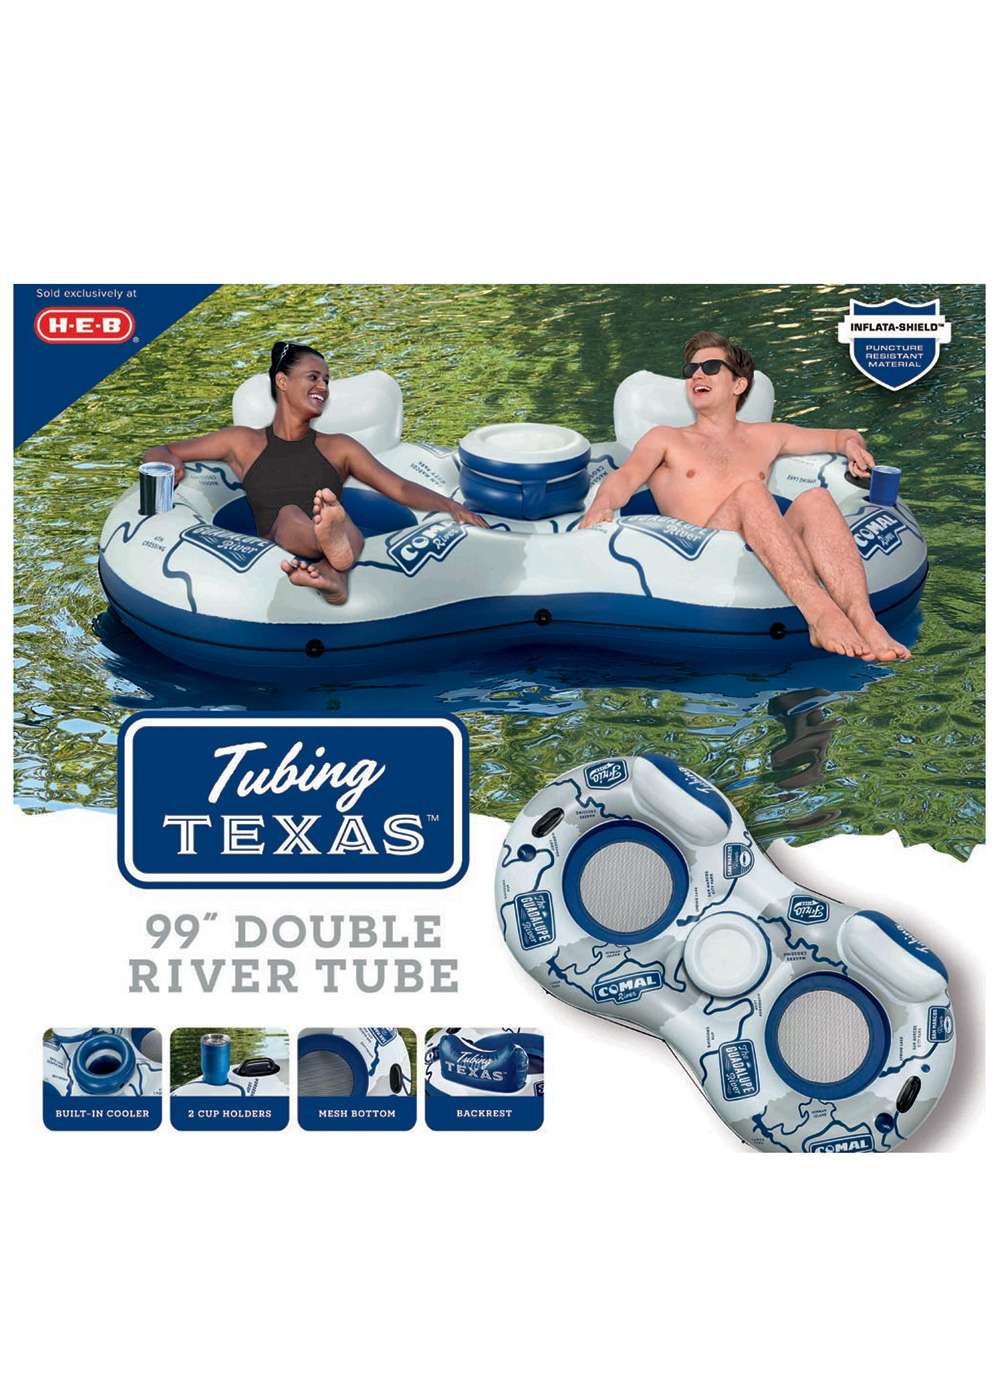 H-E-B Tubing Texas Double River Tube with Built-In Cooler - Gray